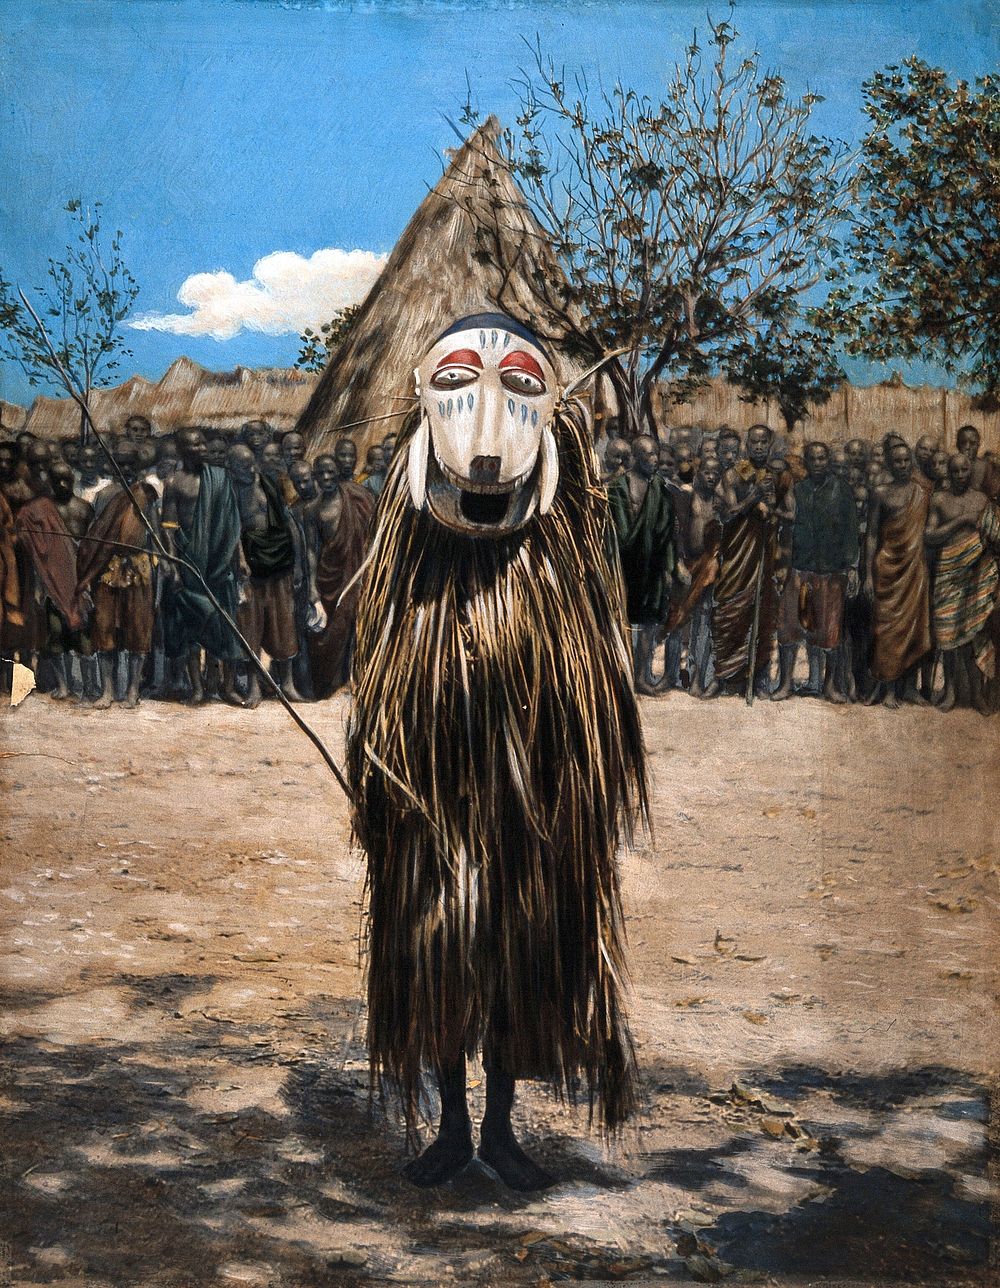 An African shaman or medicine man dressed in ritual mask and costume. Coloured photograph.